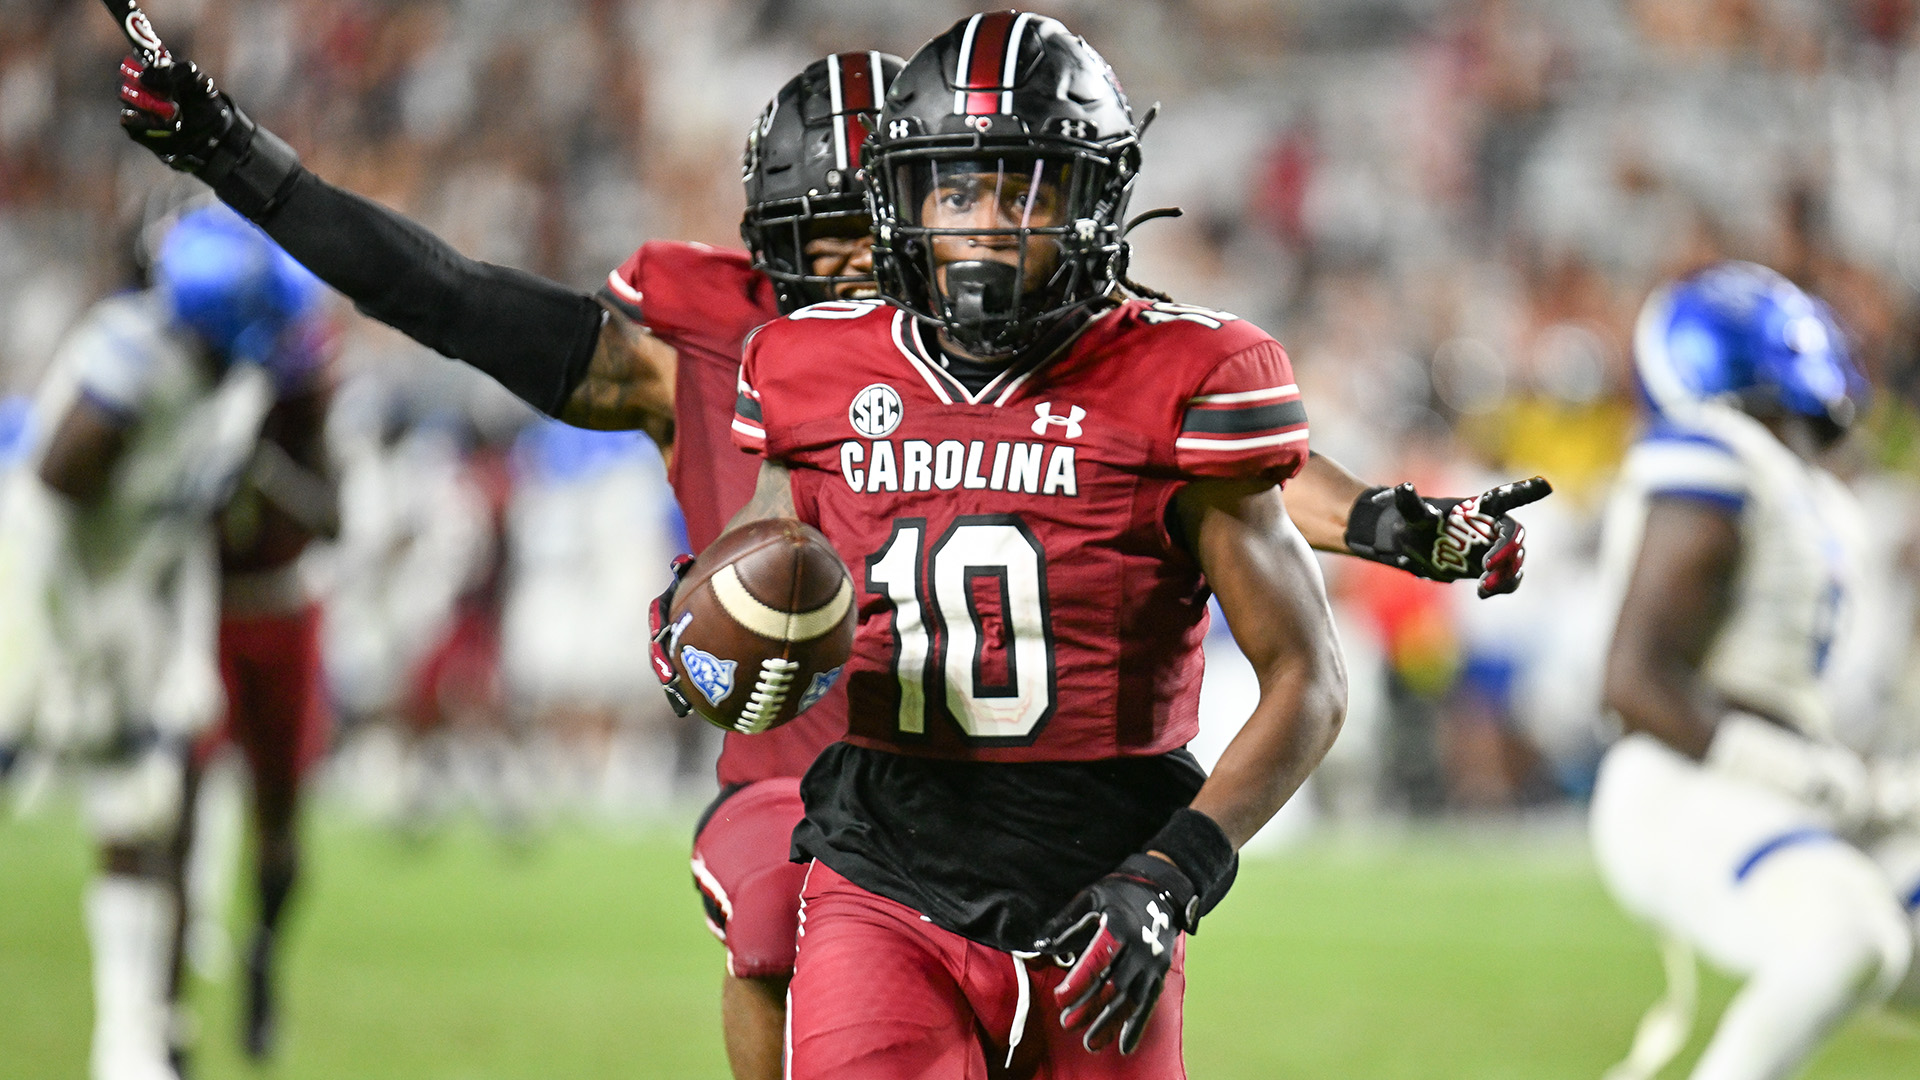 Special teams give South Carolina big boost in opening win